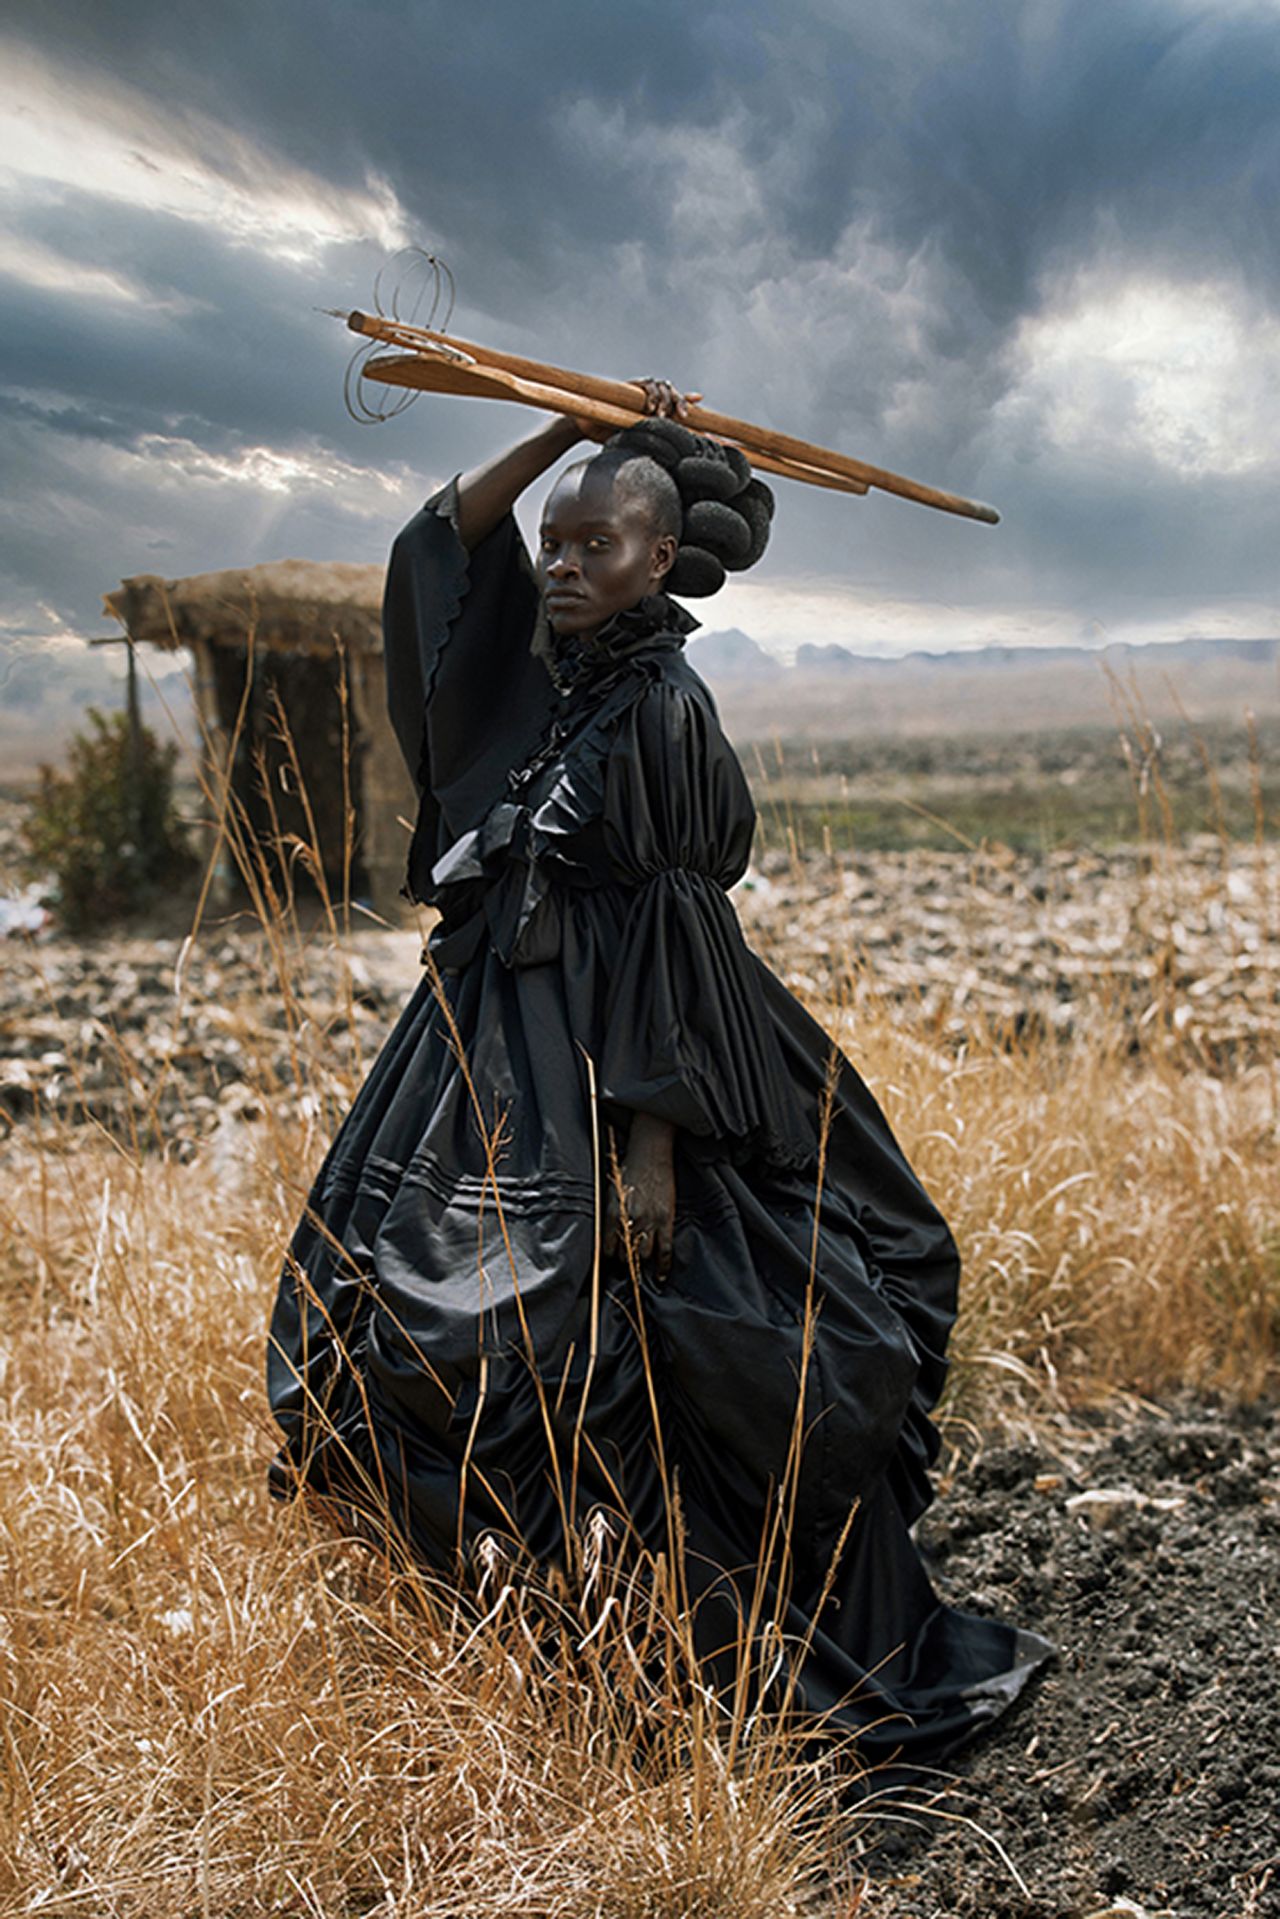 Tamary Kudita's winning image for the Open category, "African Victorian," reflects her own dual heritage.